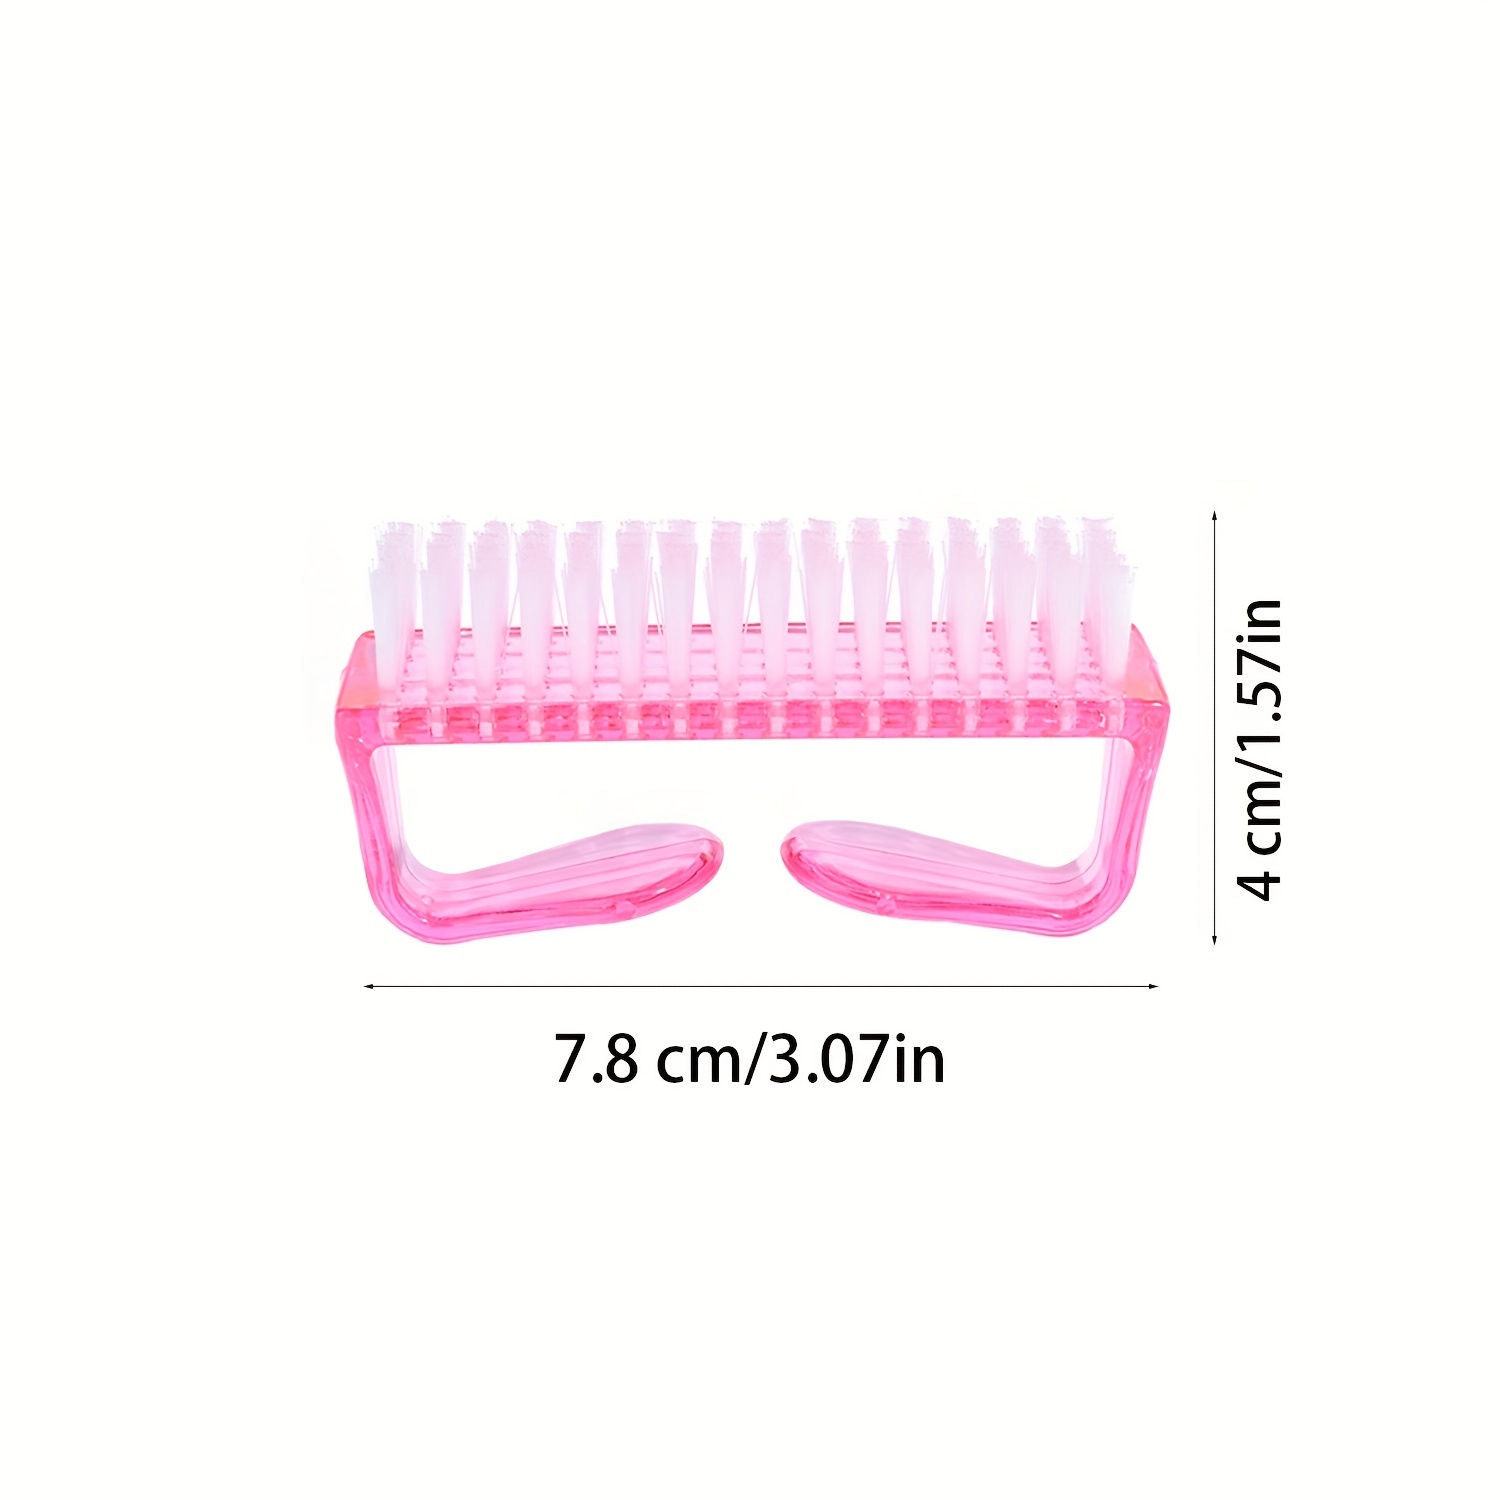 Hand And Nail Scrub Brush - Assorted Colors